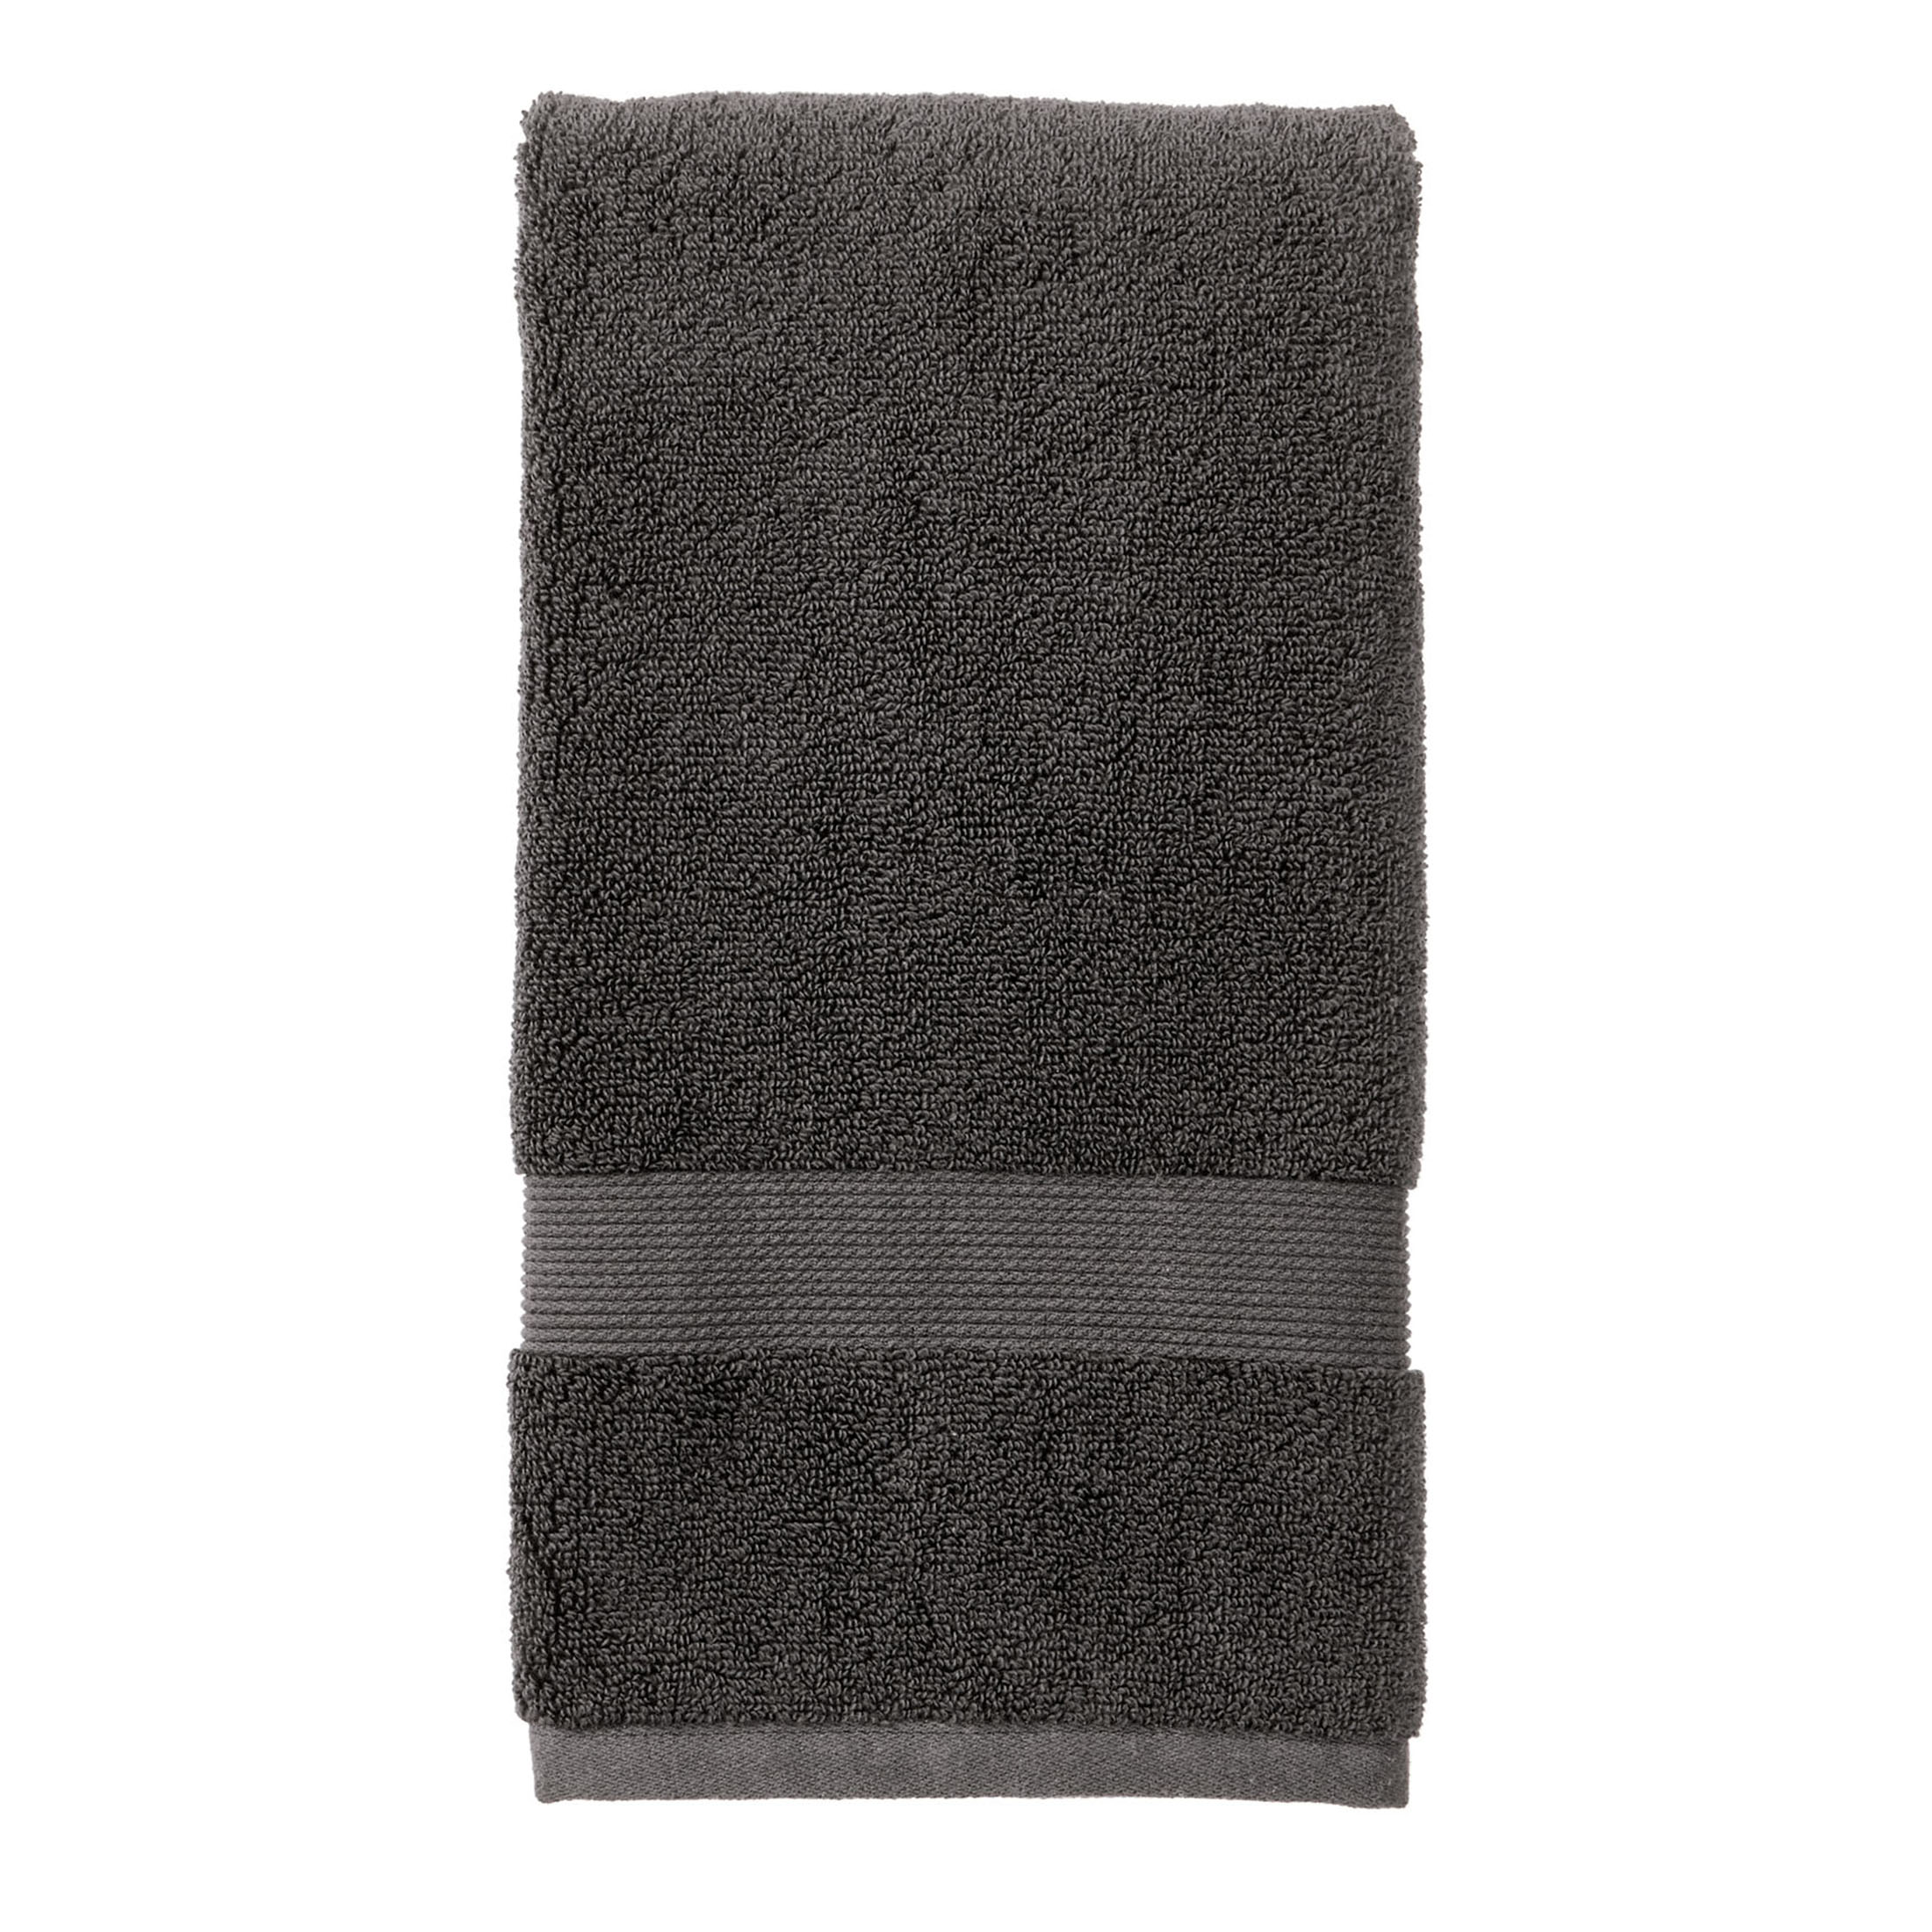 Better Homes & Gardens Signature Soft Hand Towel, Gray - image 1 of 6